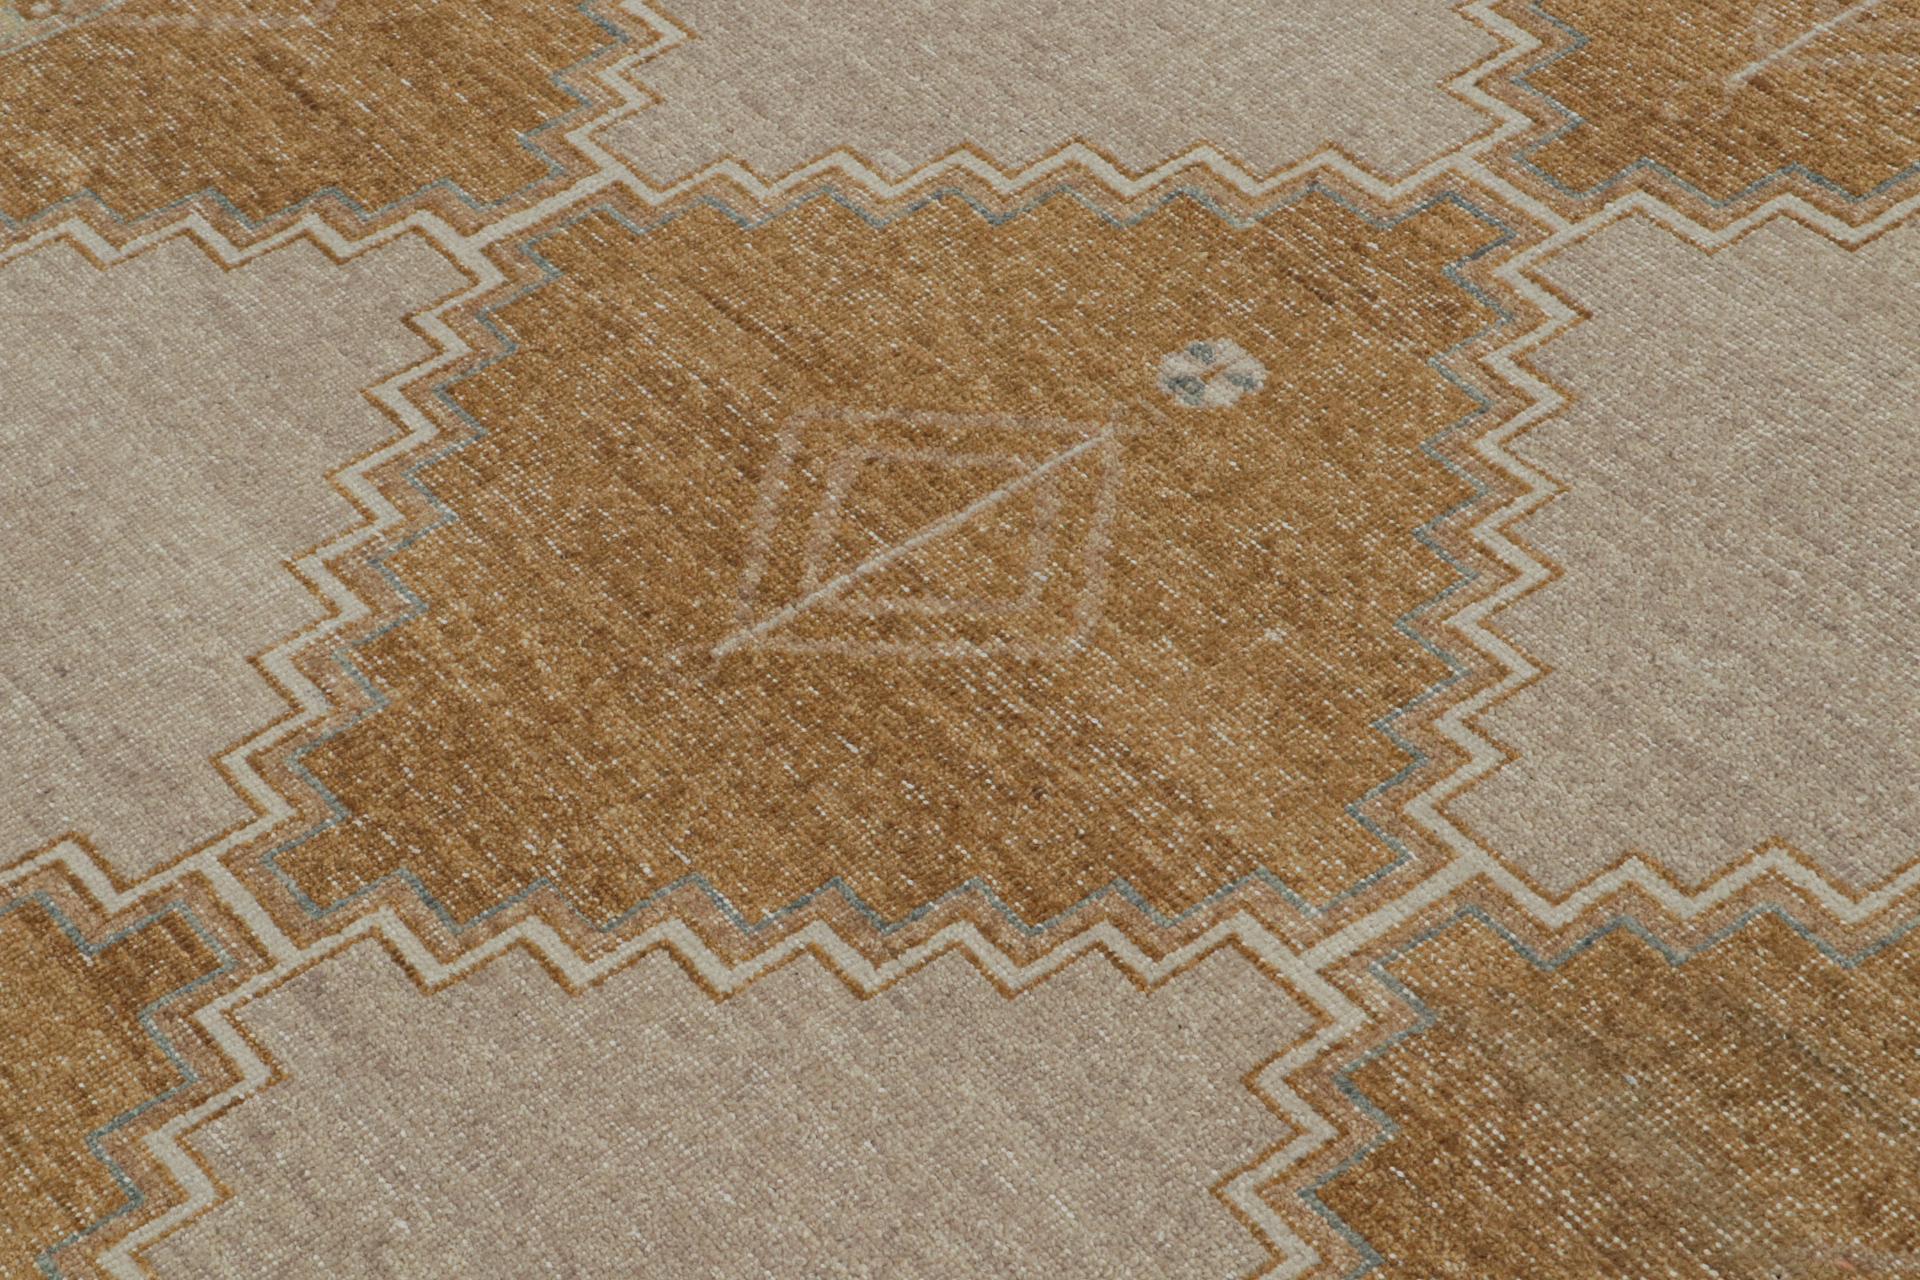 Hand-Knotted Rug & Kilim’s Distressed Tribal Rug In Beige, Brown and Gold Patterns For Sale